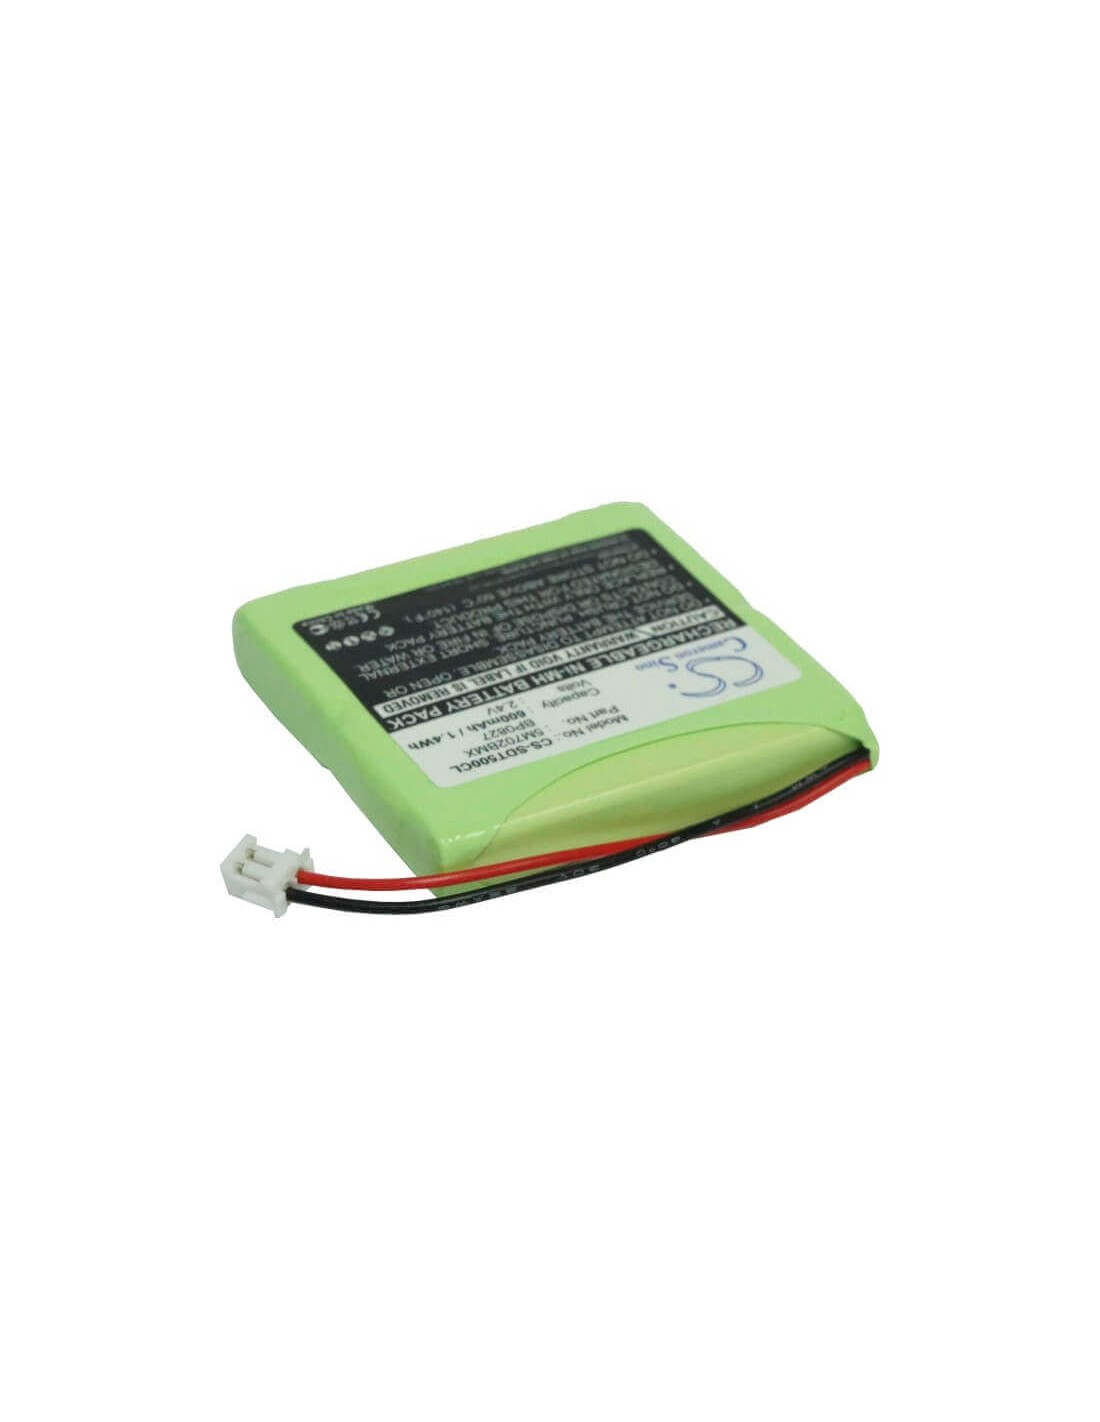 Battery for Doro, Th50, Th55, Th60, Th65 2.4V, 600mAh - 1.44Wh